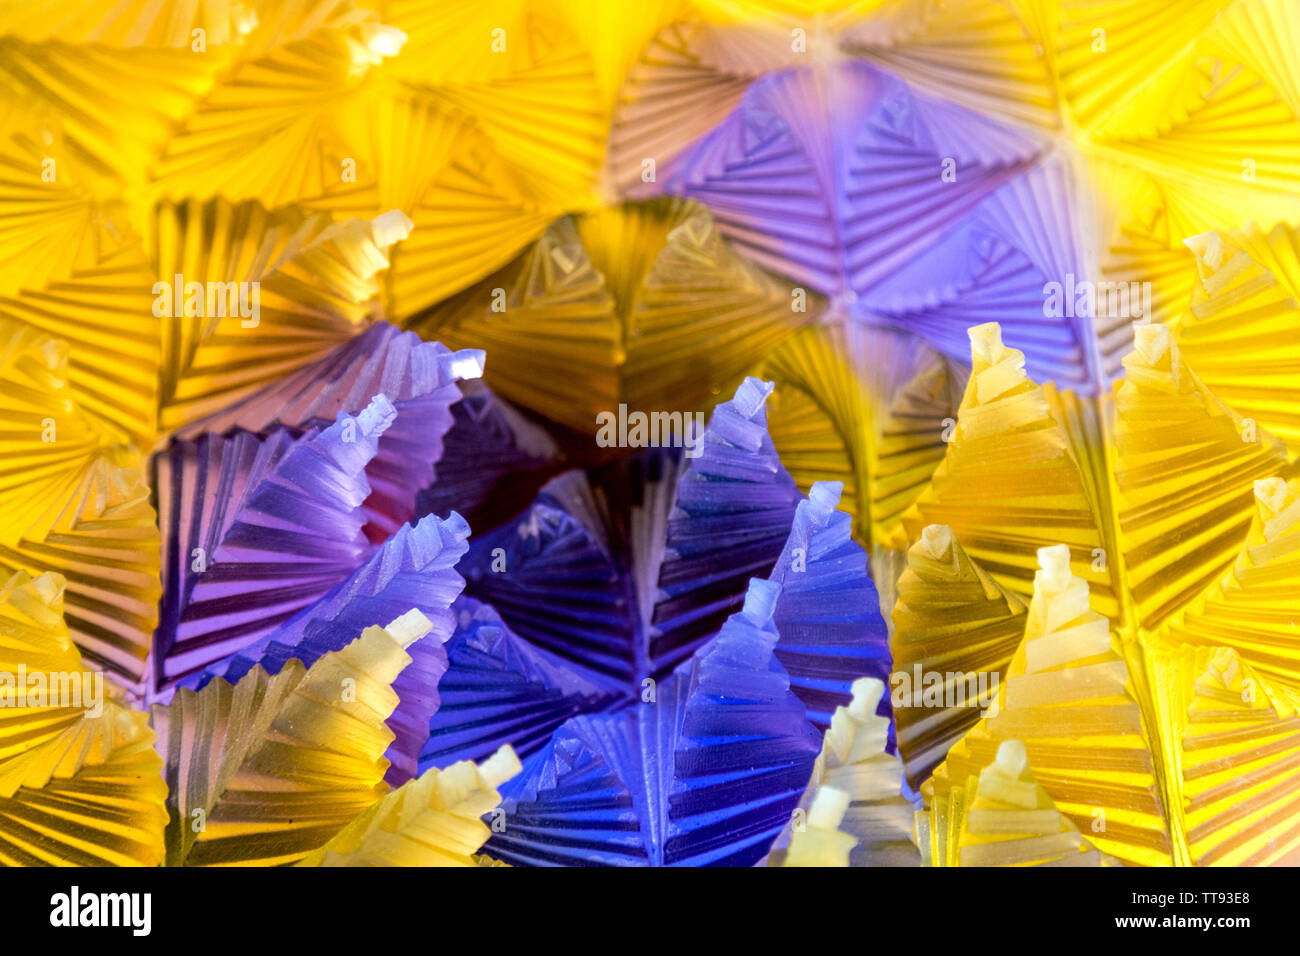 Close-up of geometric glass sculpture 'Colony' by Georgia Redpath, 'Inspired' 2019 exhibition at London Glassblowing, Bermondsey Street, London, UK Stock Photo